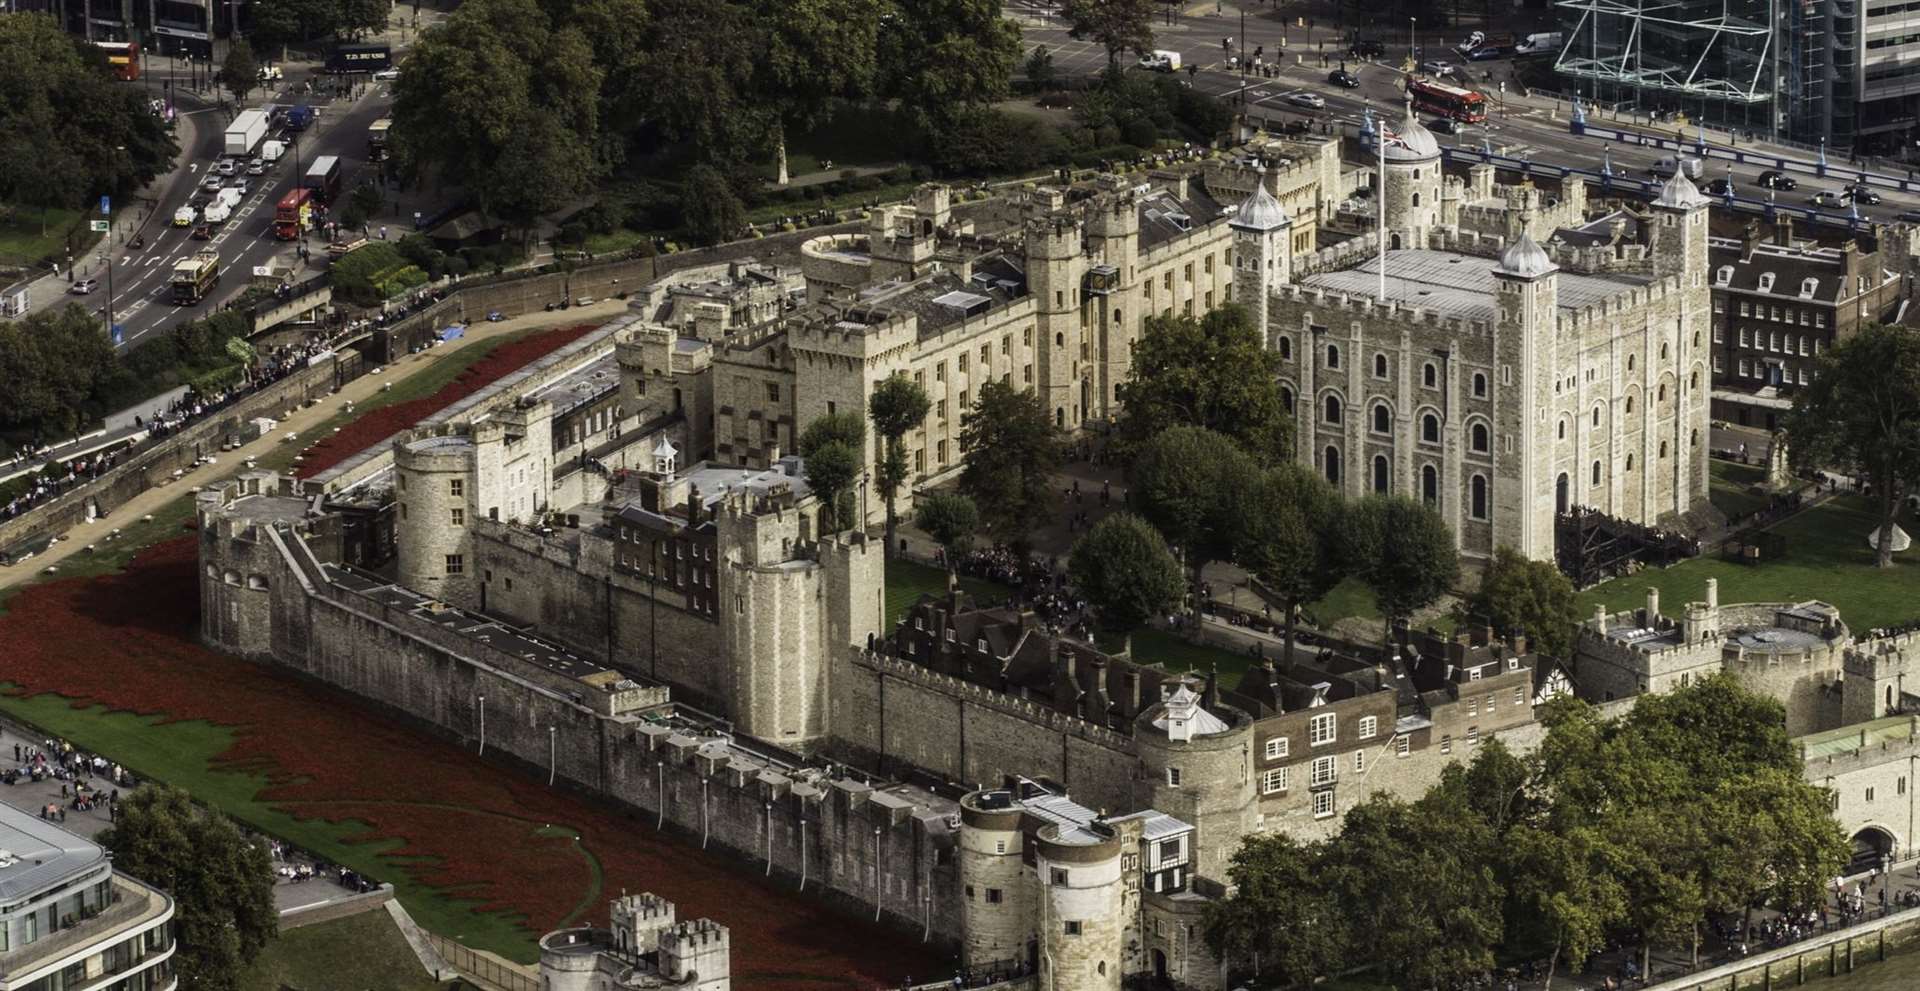 The Tower of London in 2014 when its poppy display drew massive crowds